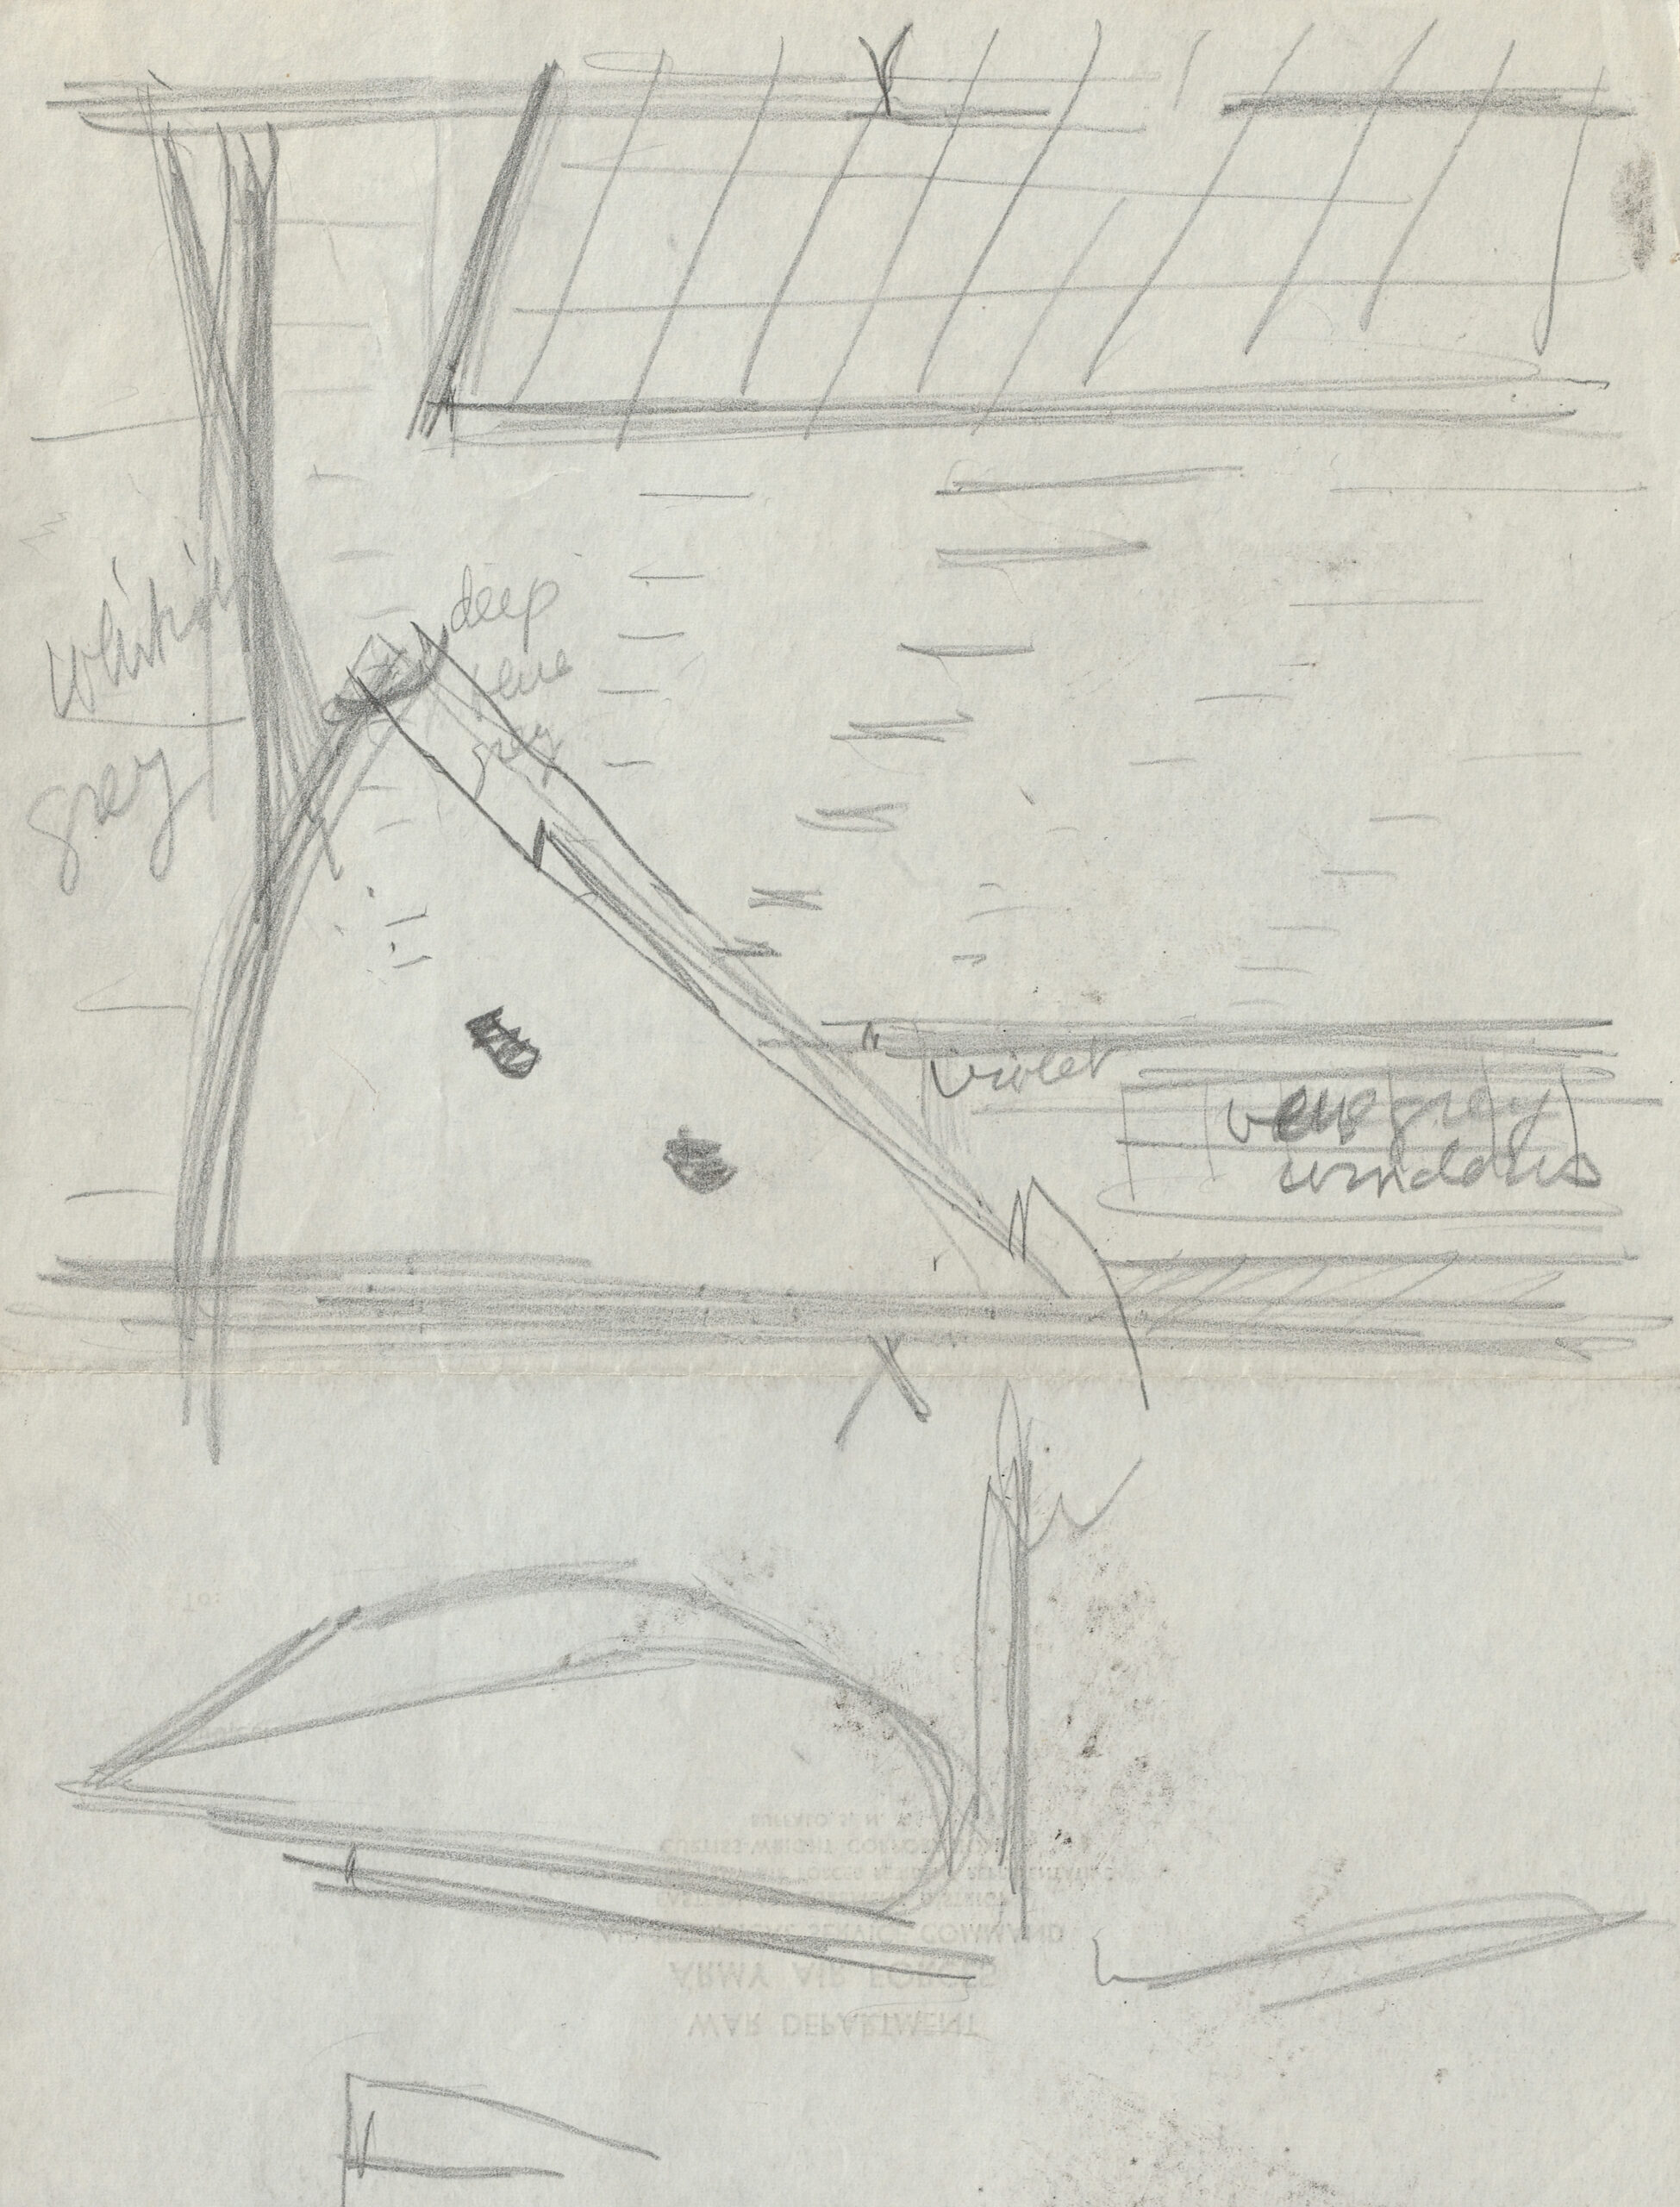 Pencil sketch of an aircraft wing inside a factory with rows of overhead lights.